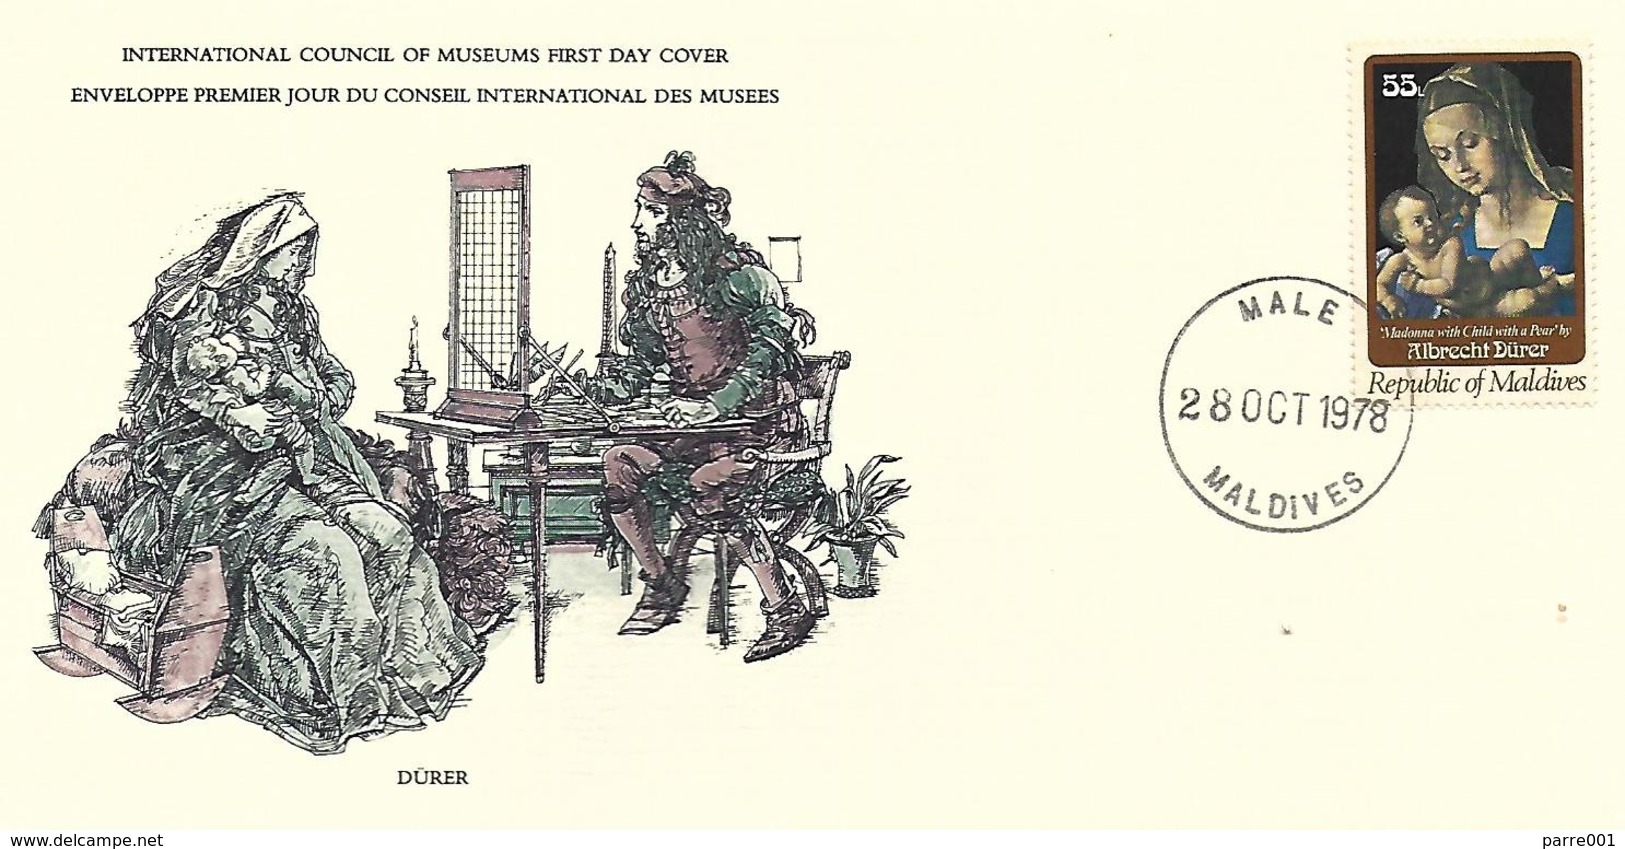 Maldives 1978 Male Albrecht Dürer Madonna With Child And Pear Painting FDC Cover - Madonne